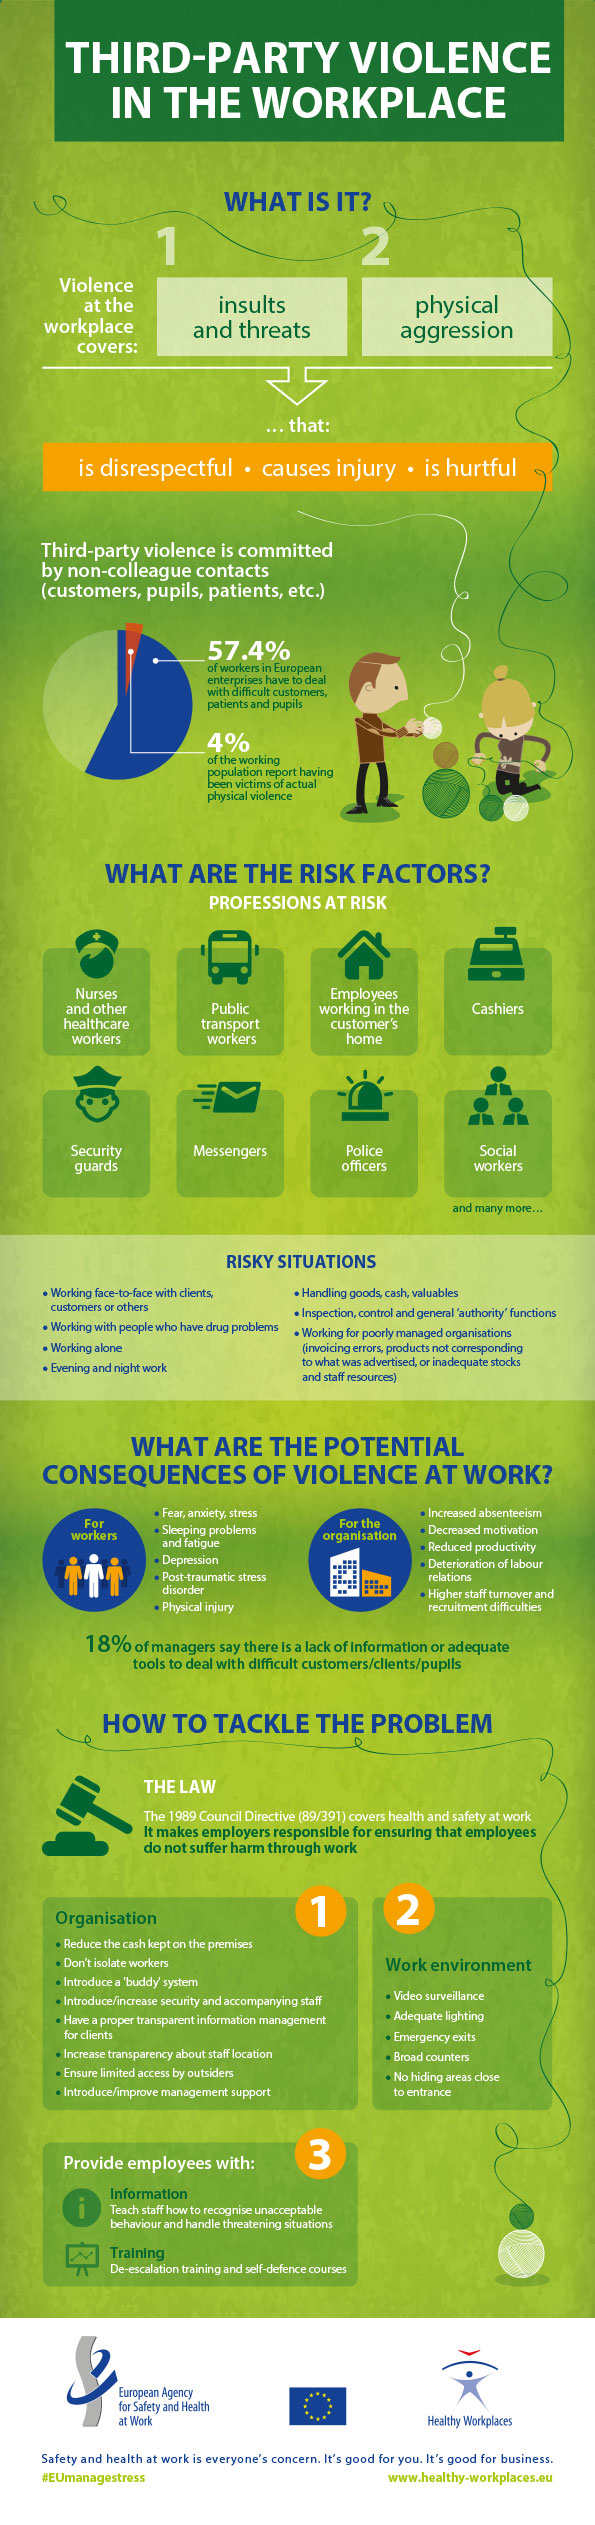 Third-party violence in the workplace - infographic